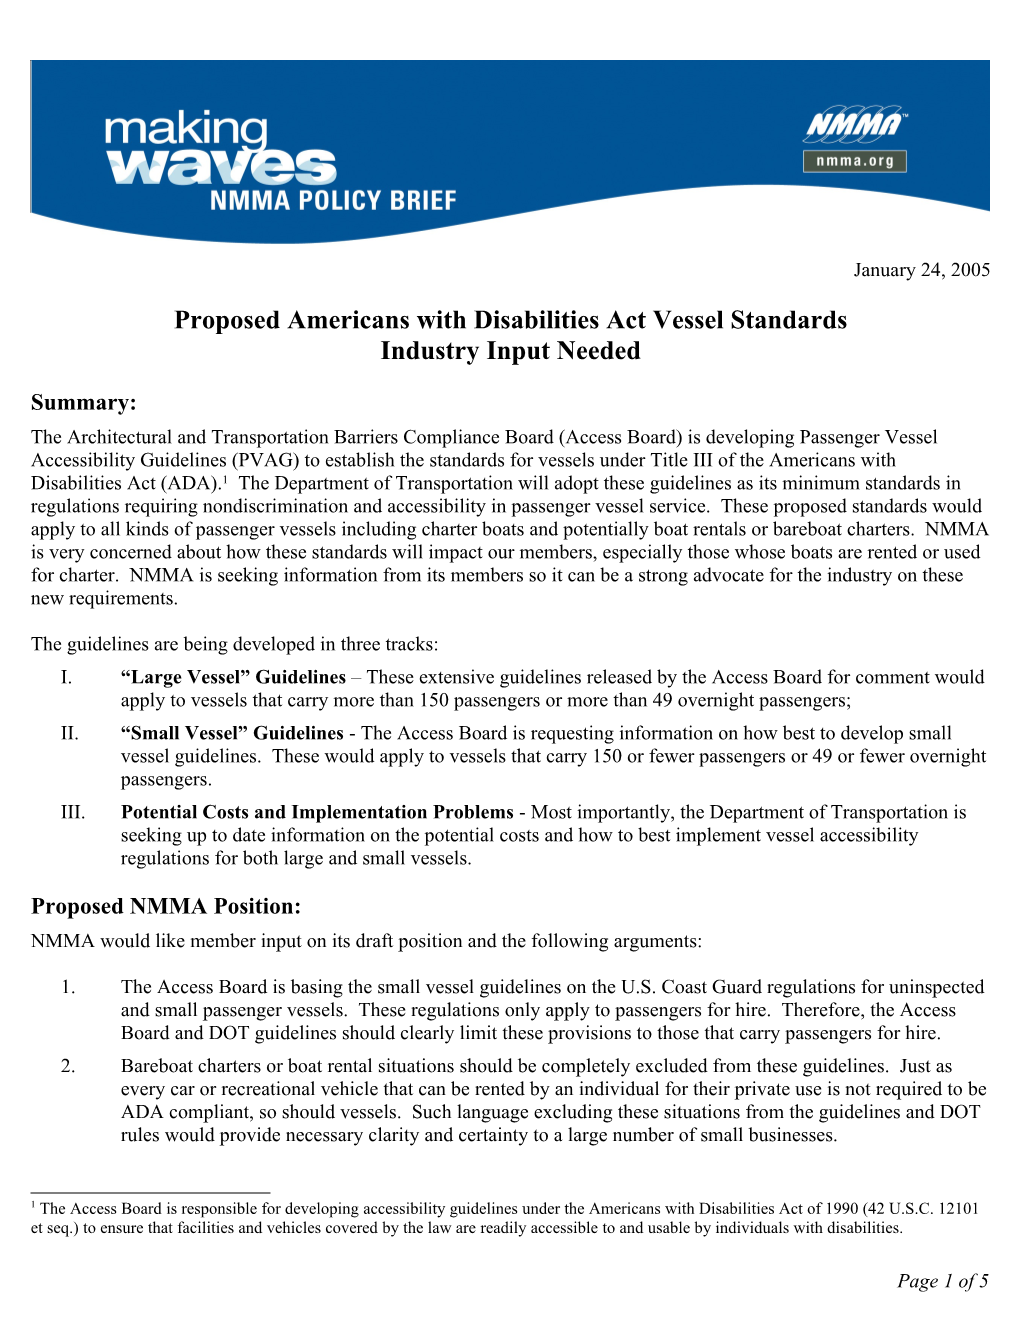 Proposed Americans with Disabilities Act Vessel Standards